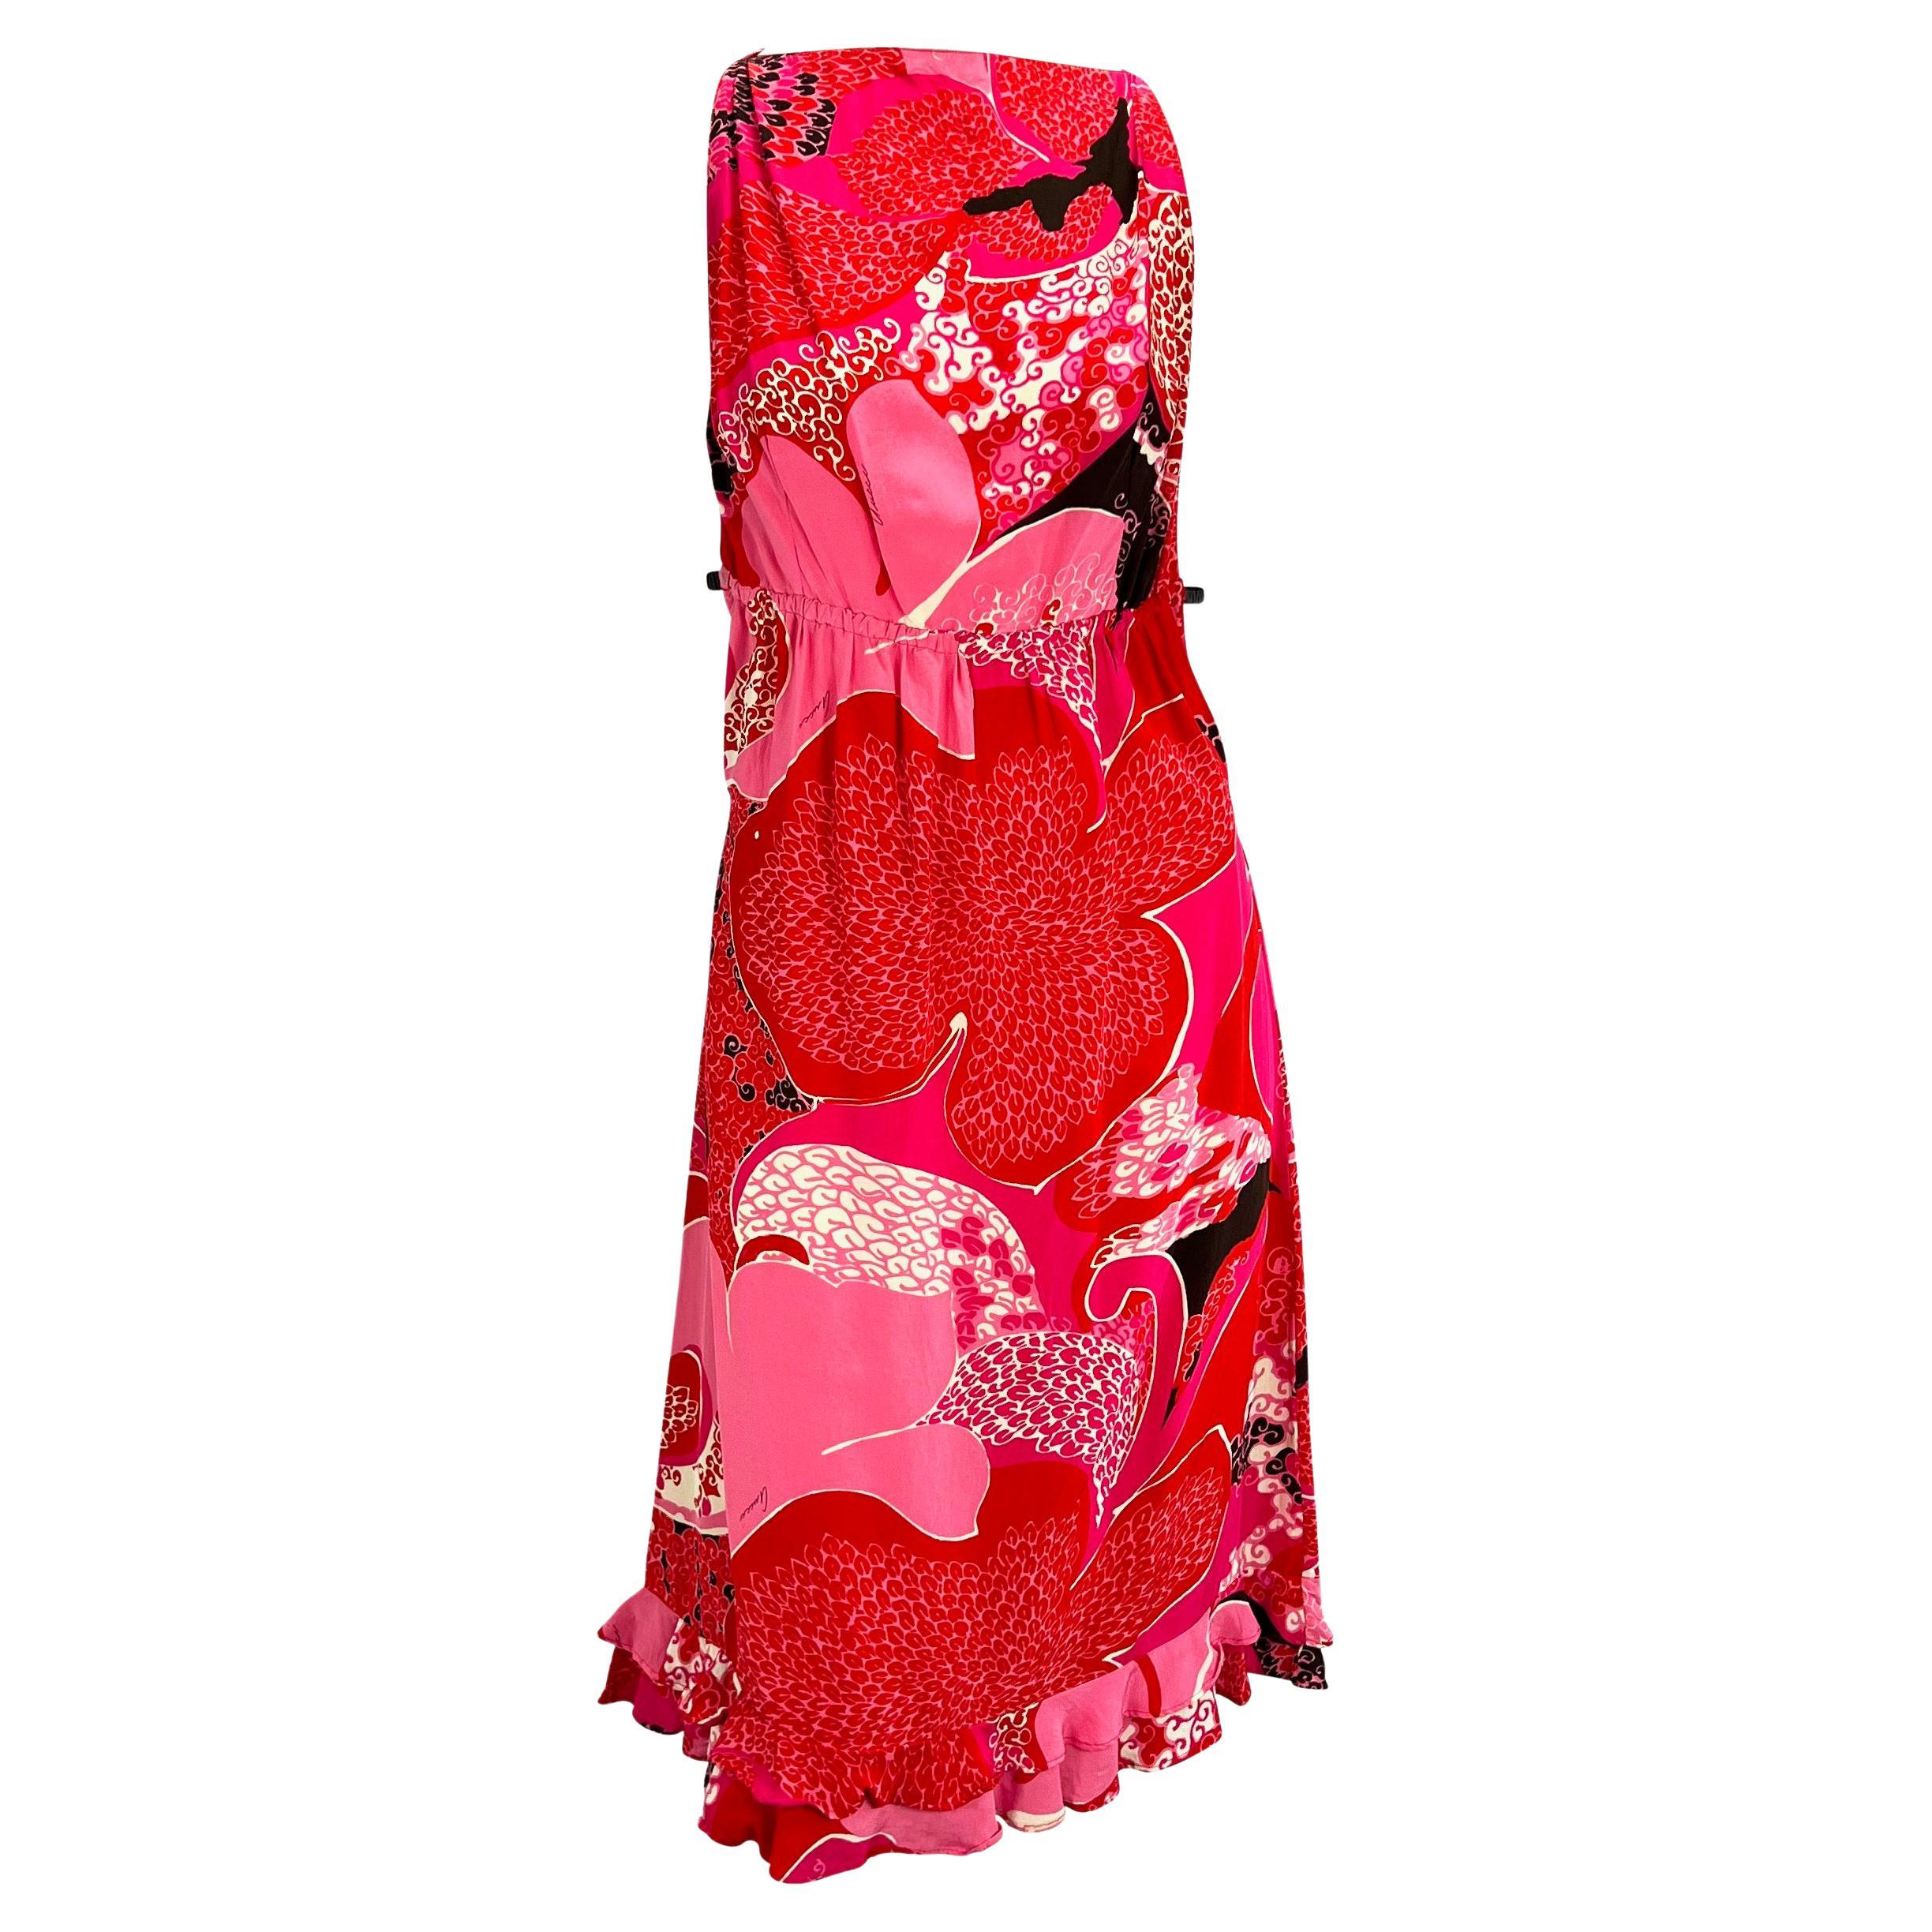 S/S 1999 Gucci by Tom Ford Pink 'Acid Flower' Silk Leather Strap Dress Runway For Sale 3